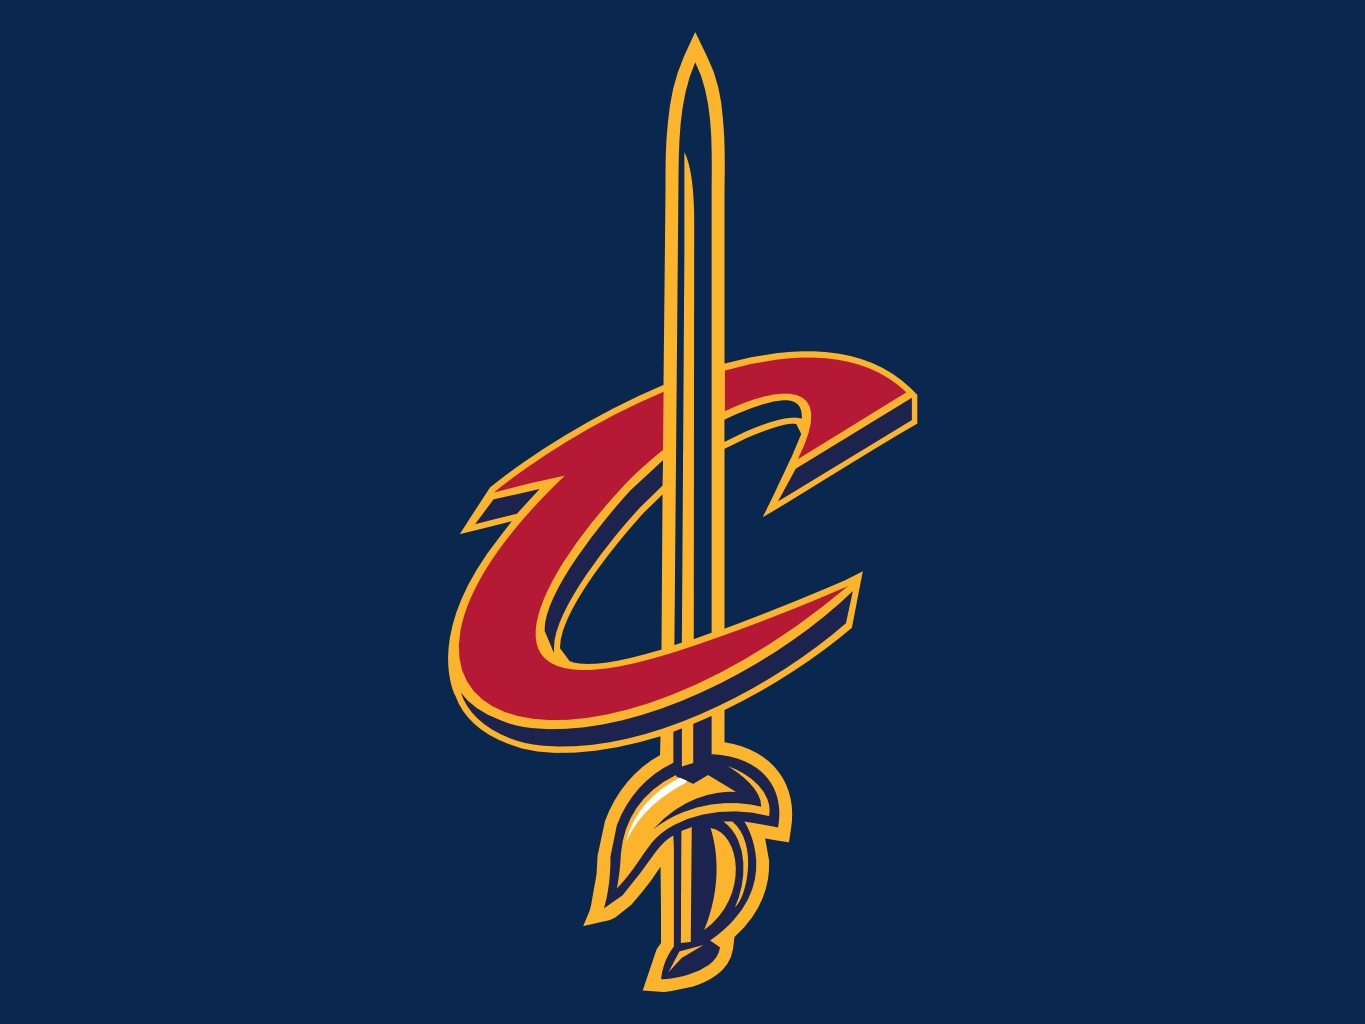 Cleveland Cavaliers Image